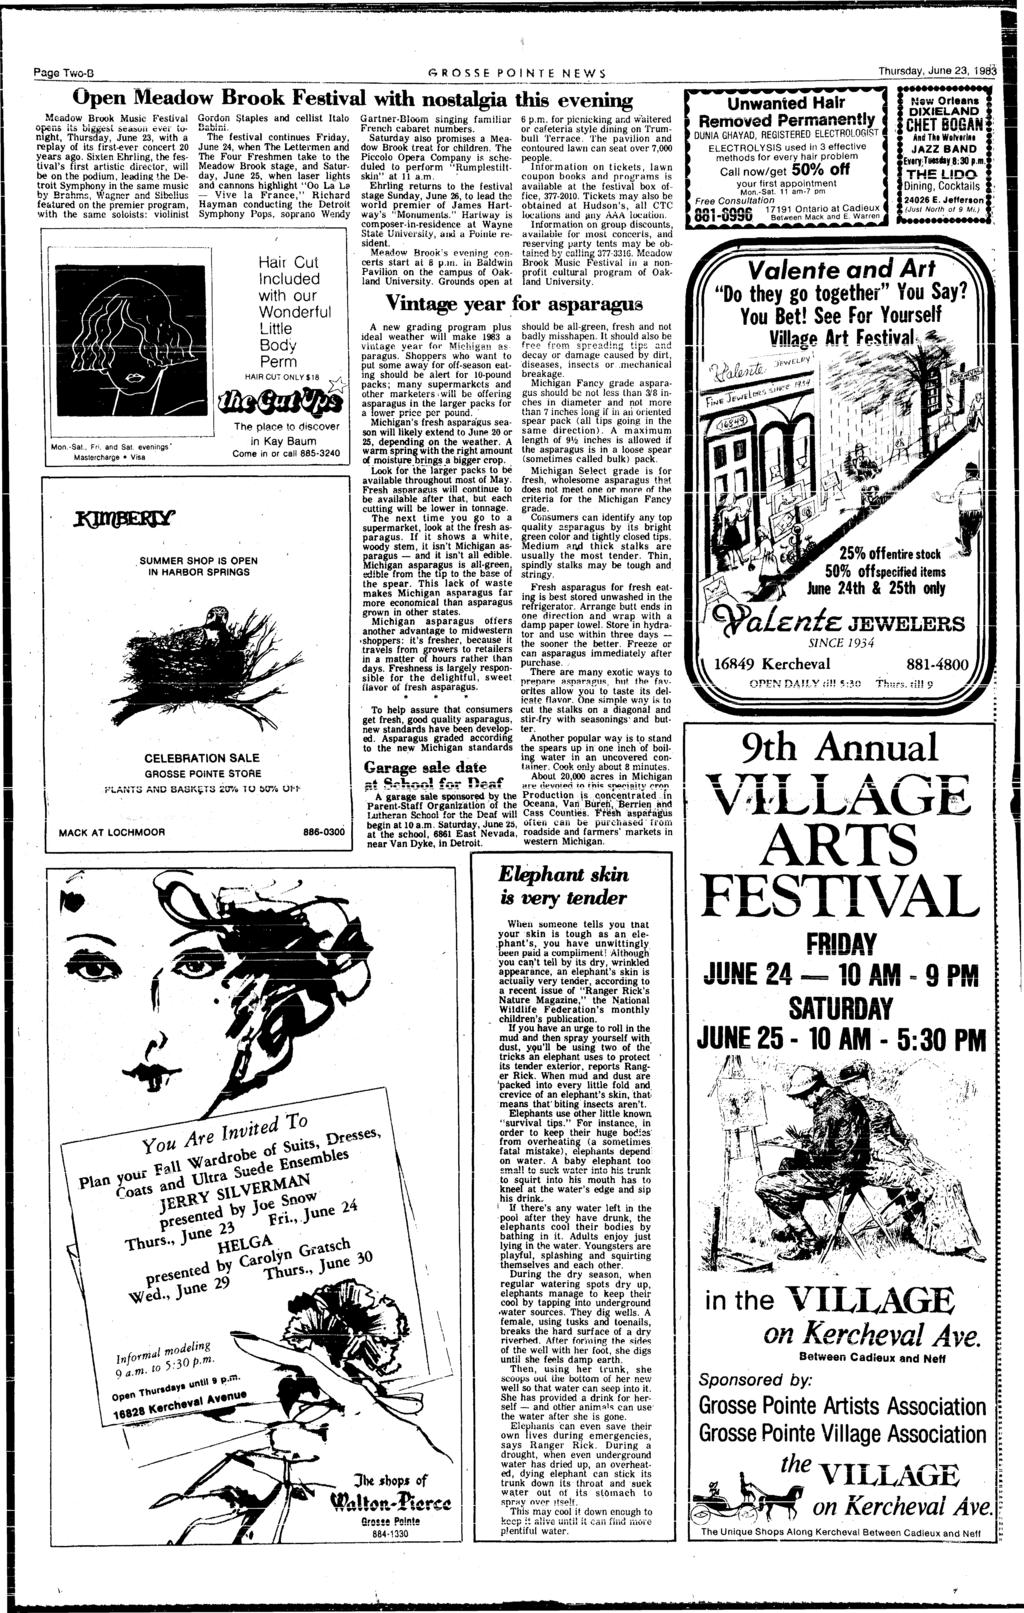 Page Two-B CROSSE POSNTE NEWS Thursday, June 23, 1983 Meadow Brook Musc Festval Op6H5 ts bggest Seasu ever tonght, Thursday, June 23, wth a replay of ts frst-ever concert 20 years ago.